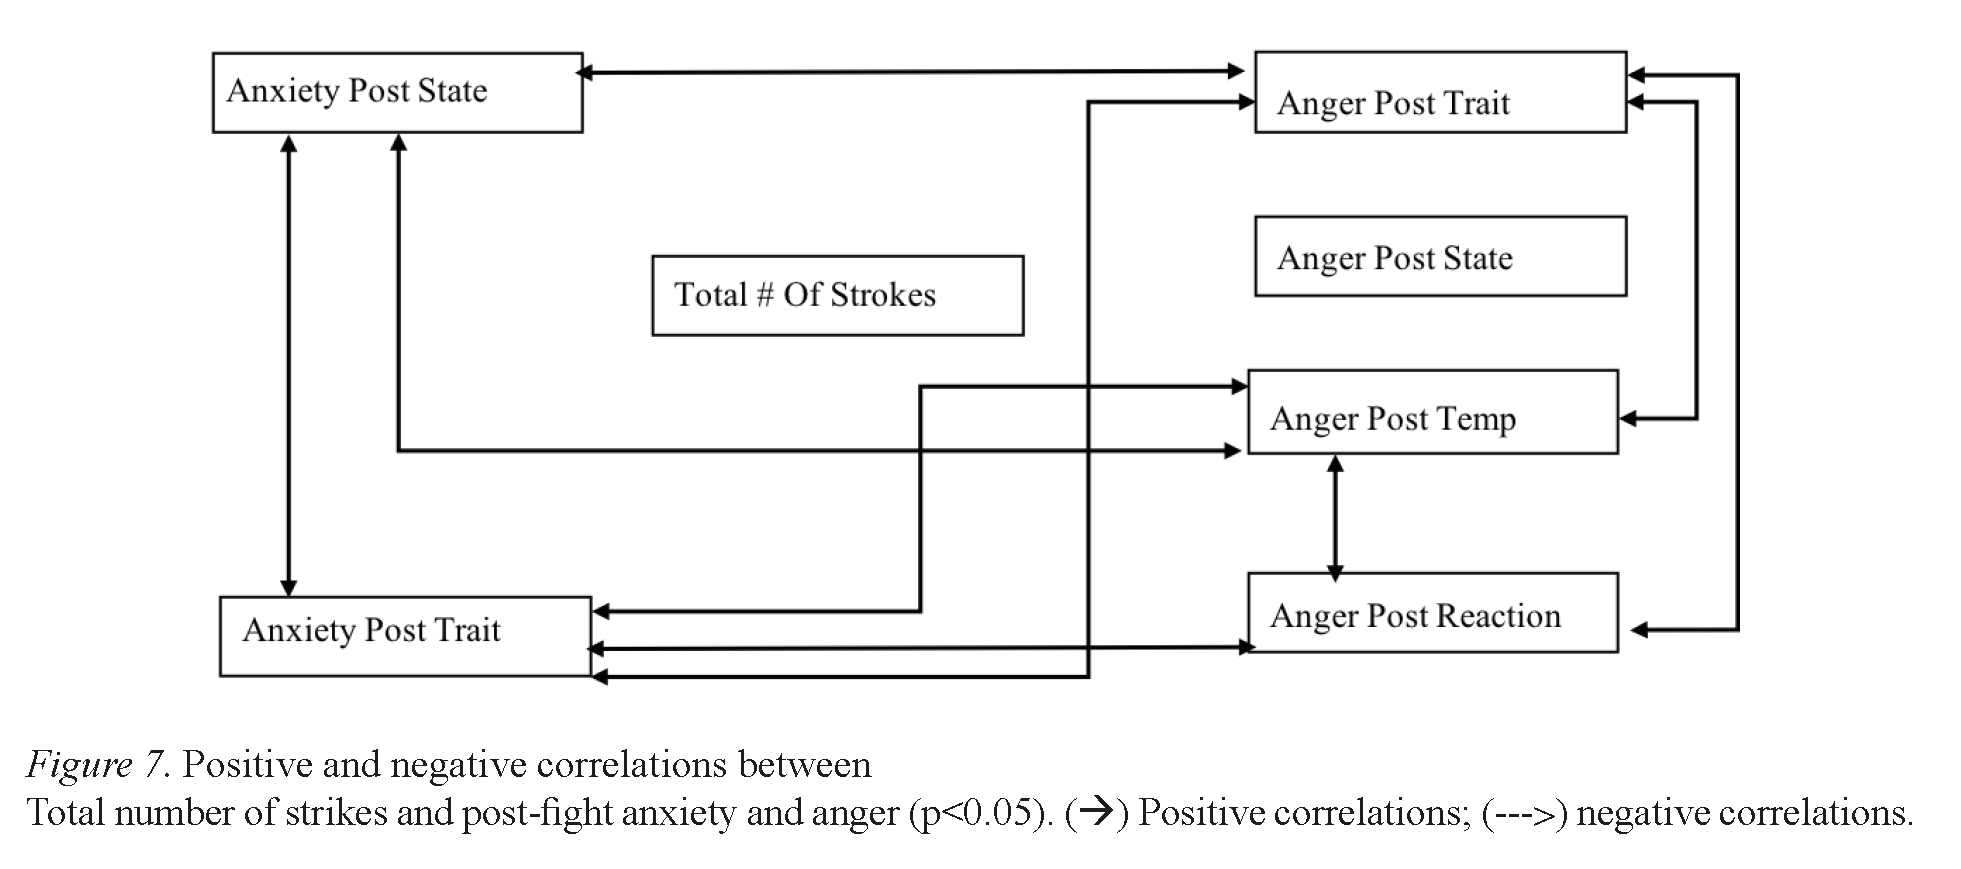 Positive and negative correlations between Total number of strikes and post-fight anxiety and anger (p<0.05).